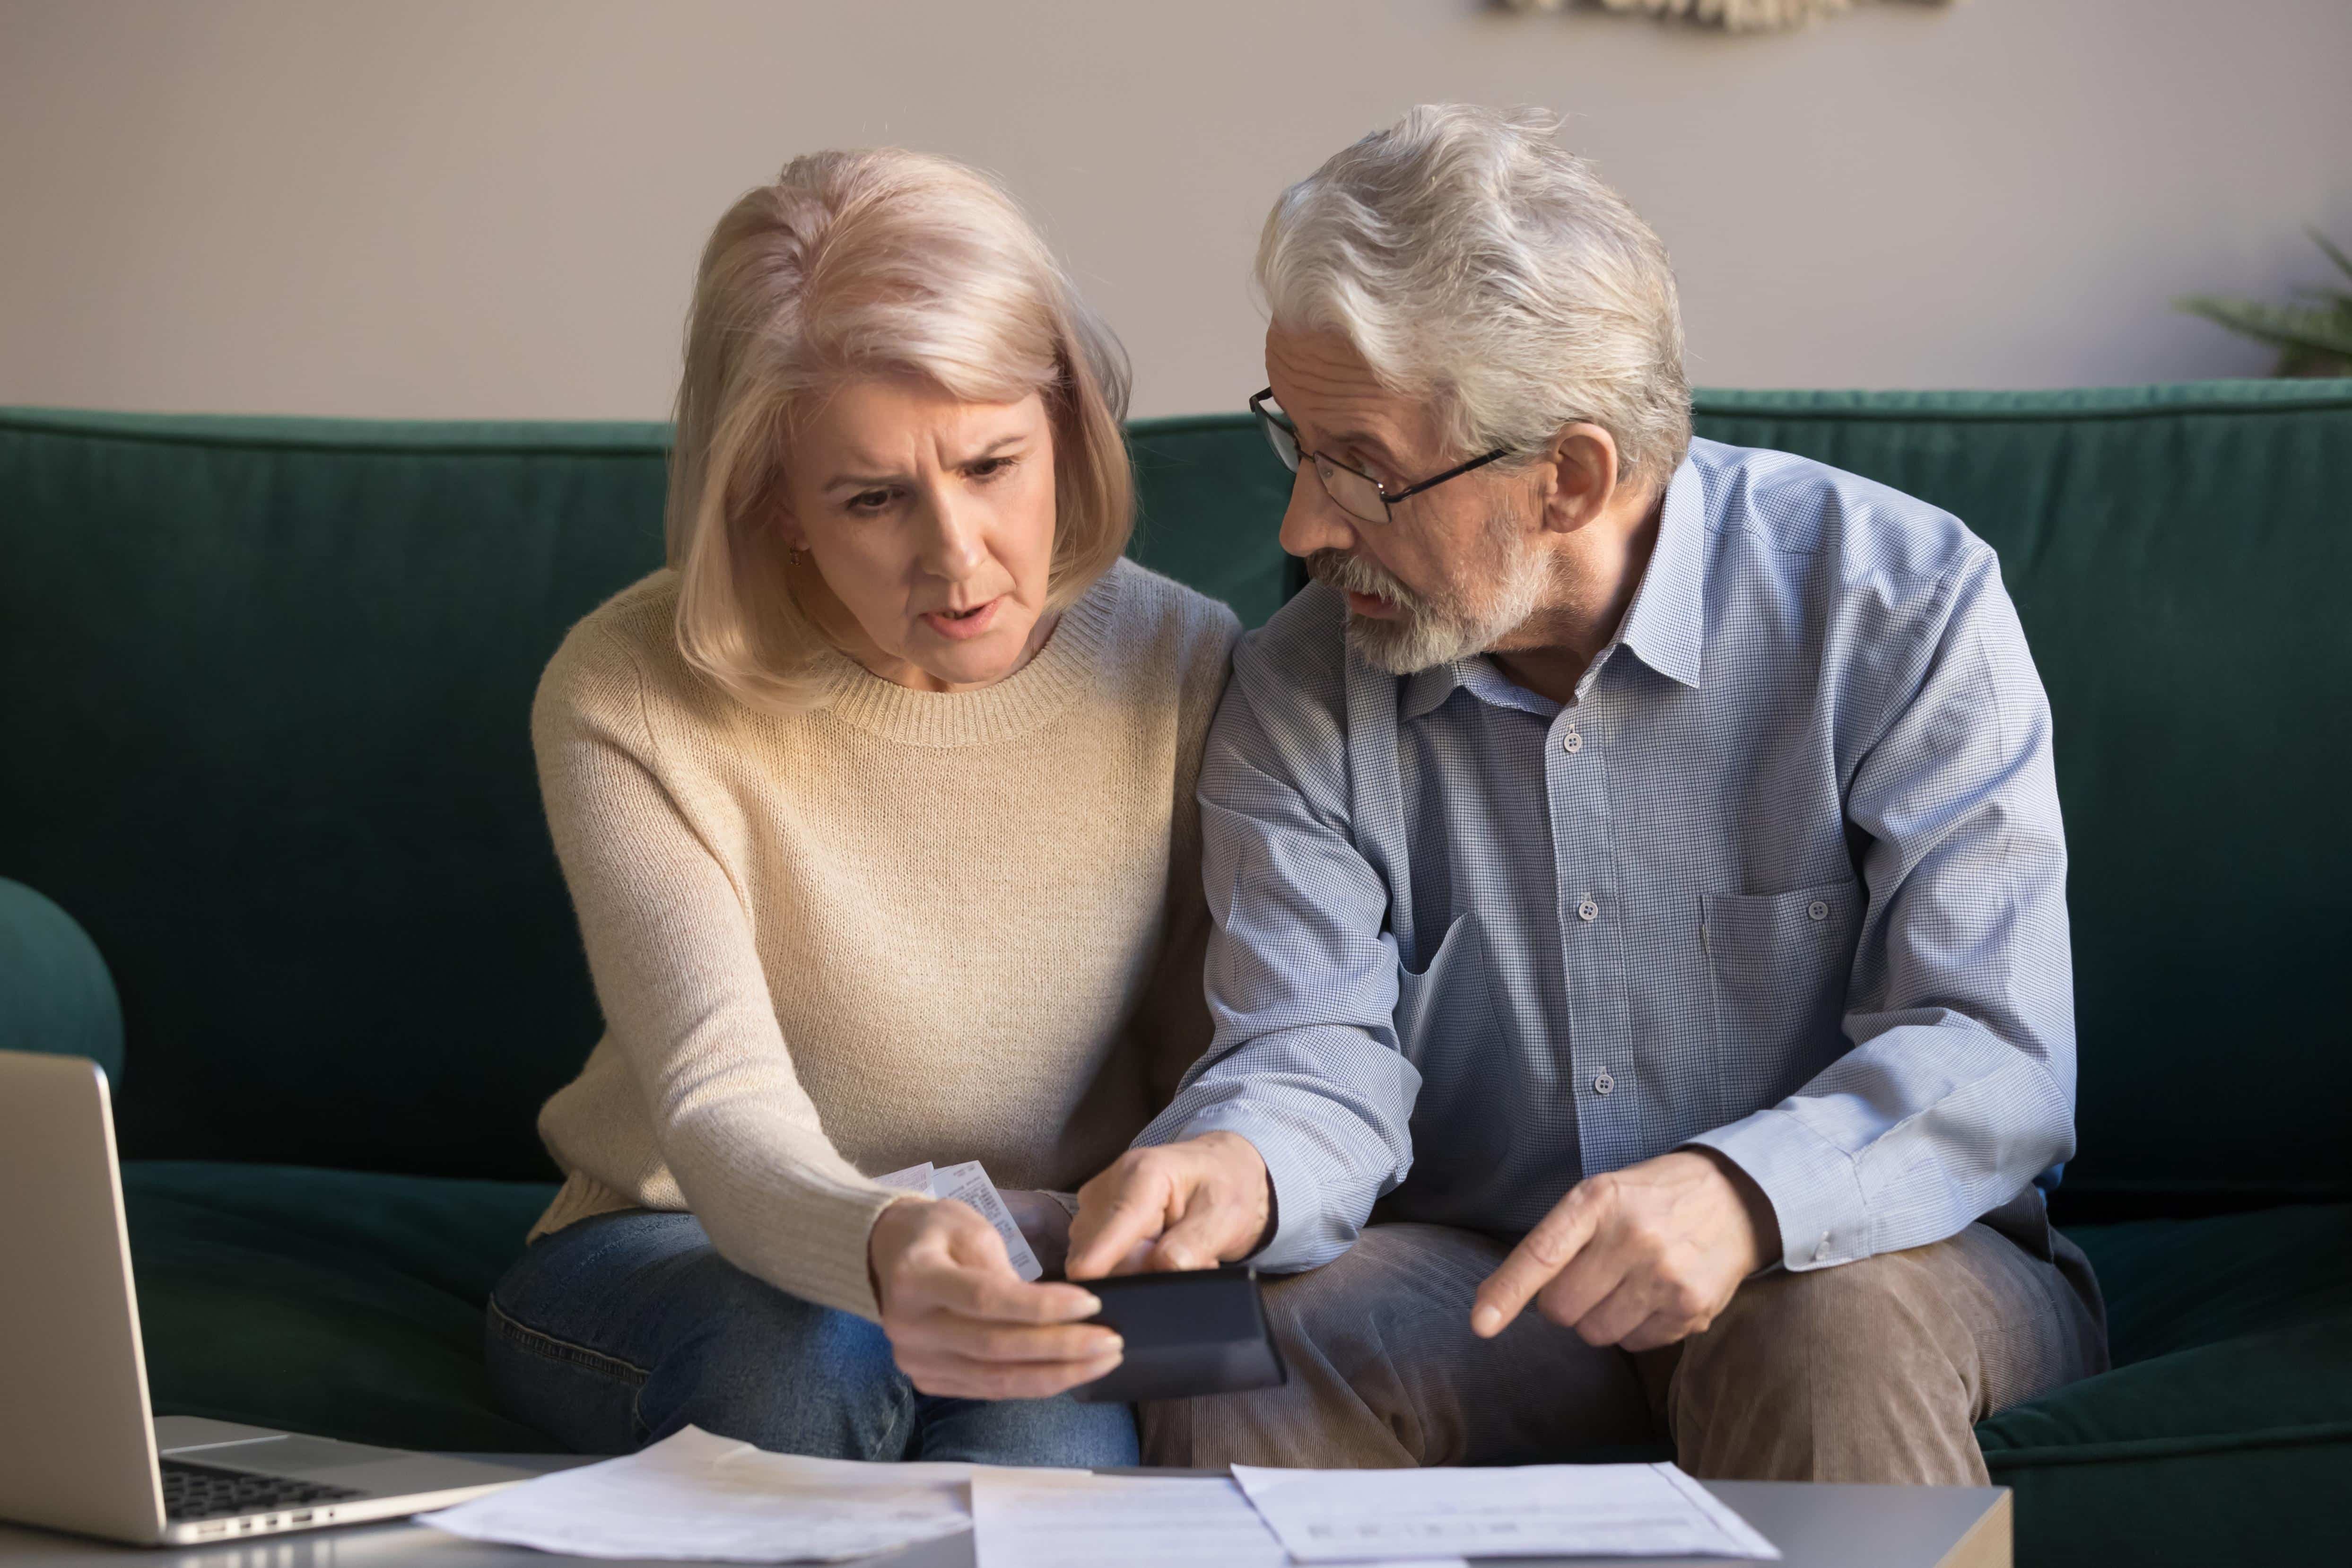 Serious stressed senior old couple worried about paperwork discuss unpaid bank debt calculate bills, shocked poor retired family looking at calculator counting loan payment upset about money problem